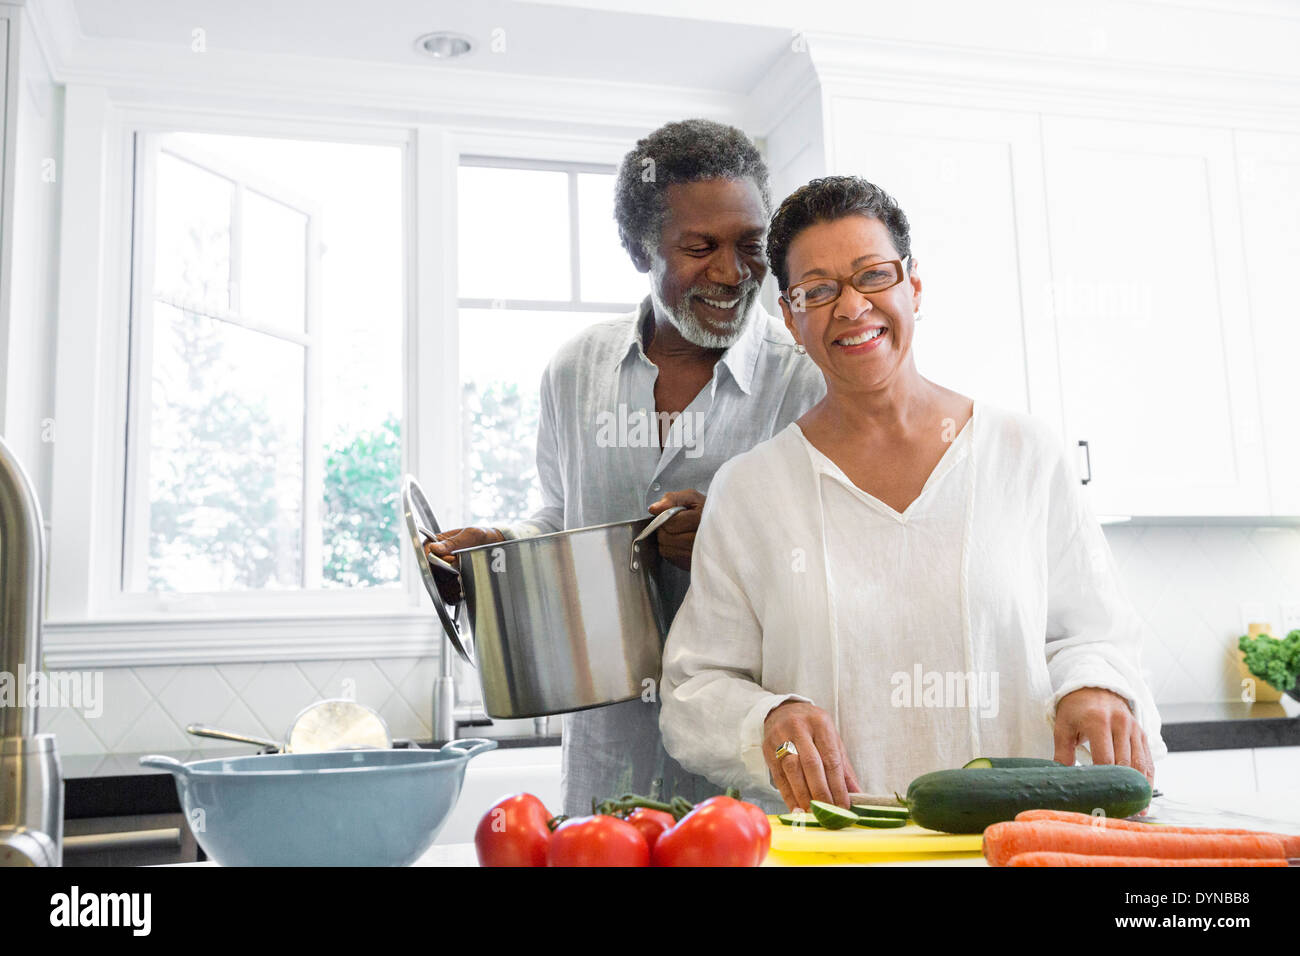 Senior couple cooking in kitchen Banque D'Images